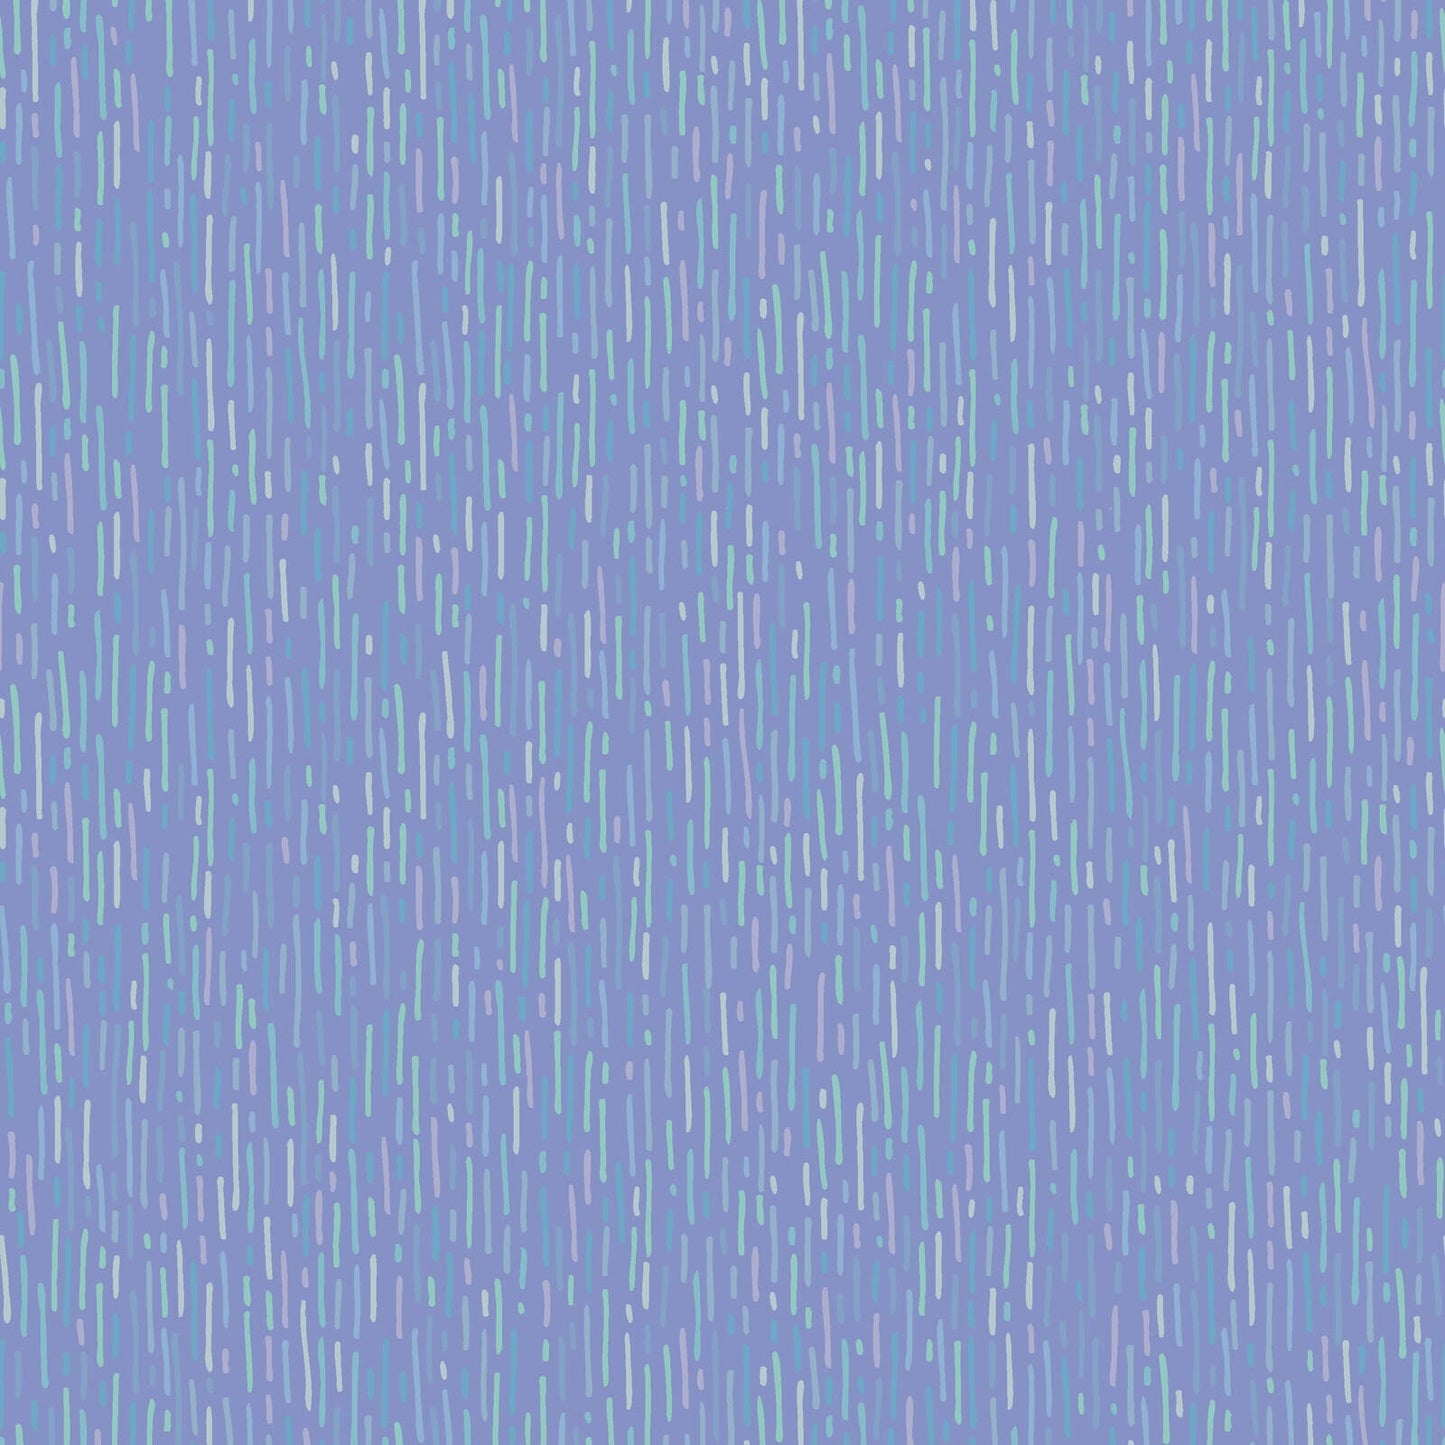 43-44" Wide SUN SHOWERS RAIN Blue/Purple Quilt Fabric by Christina Cameli for Maywood Studio - Sold by the Yard